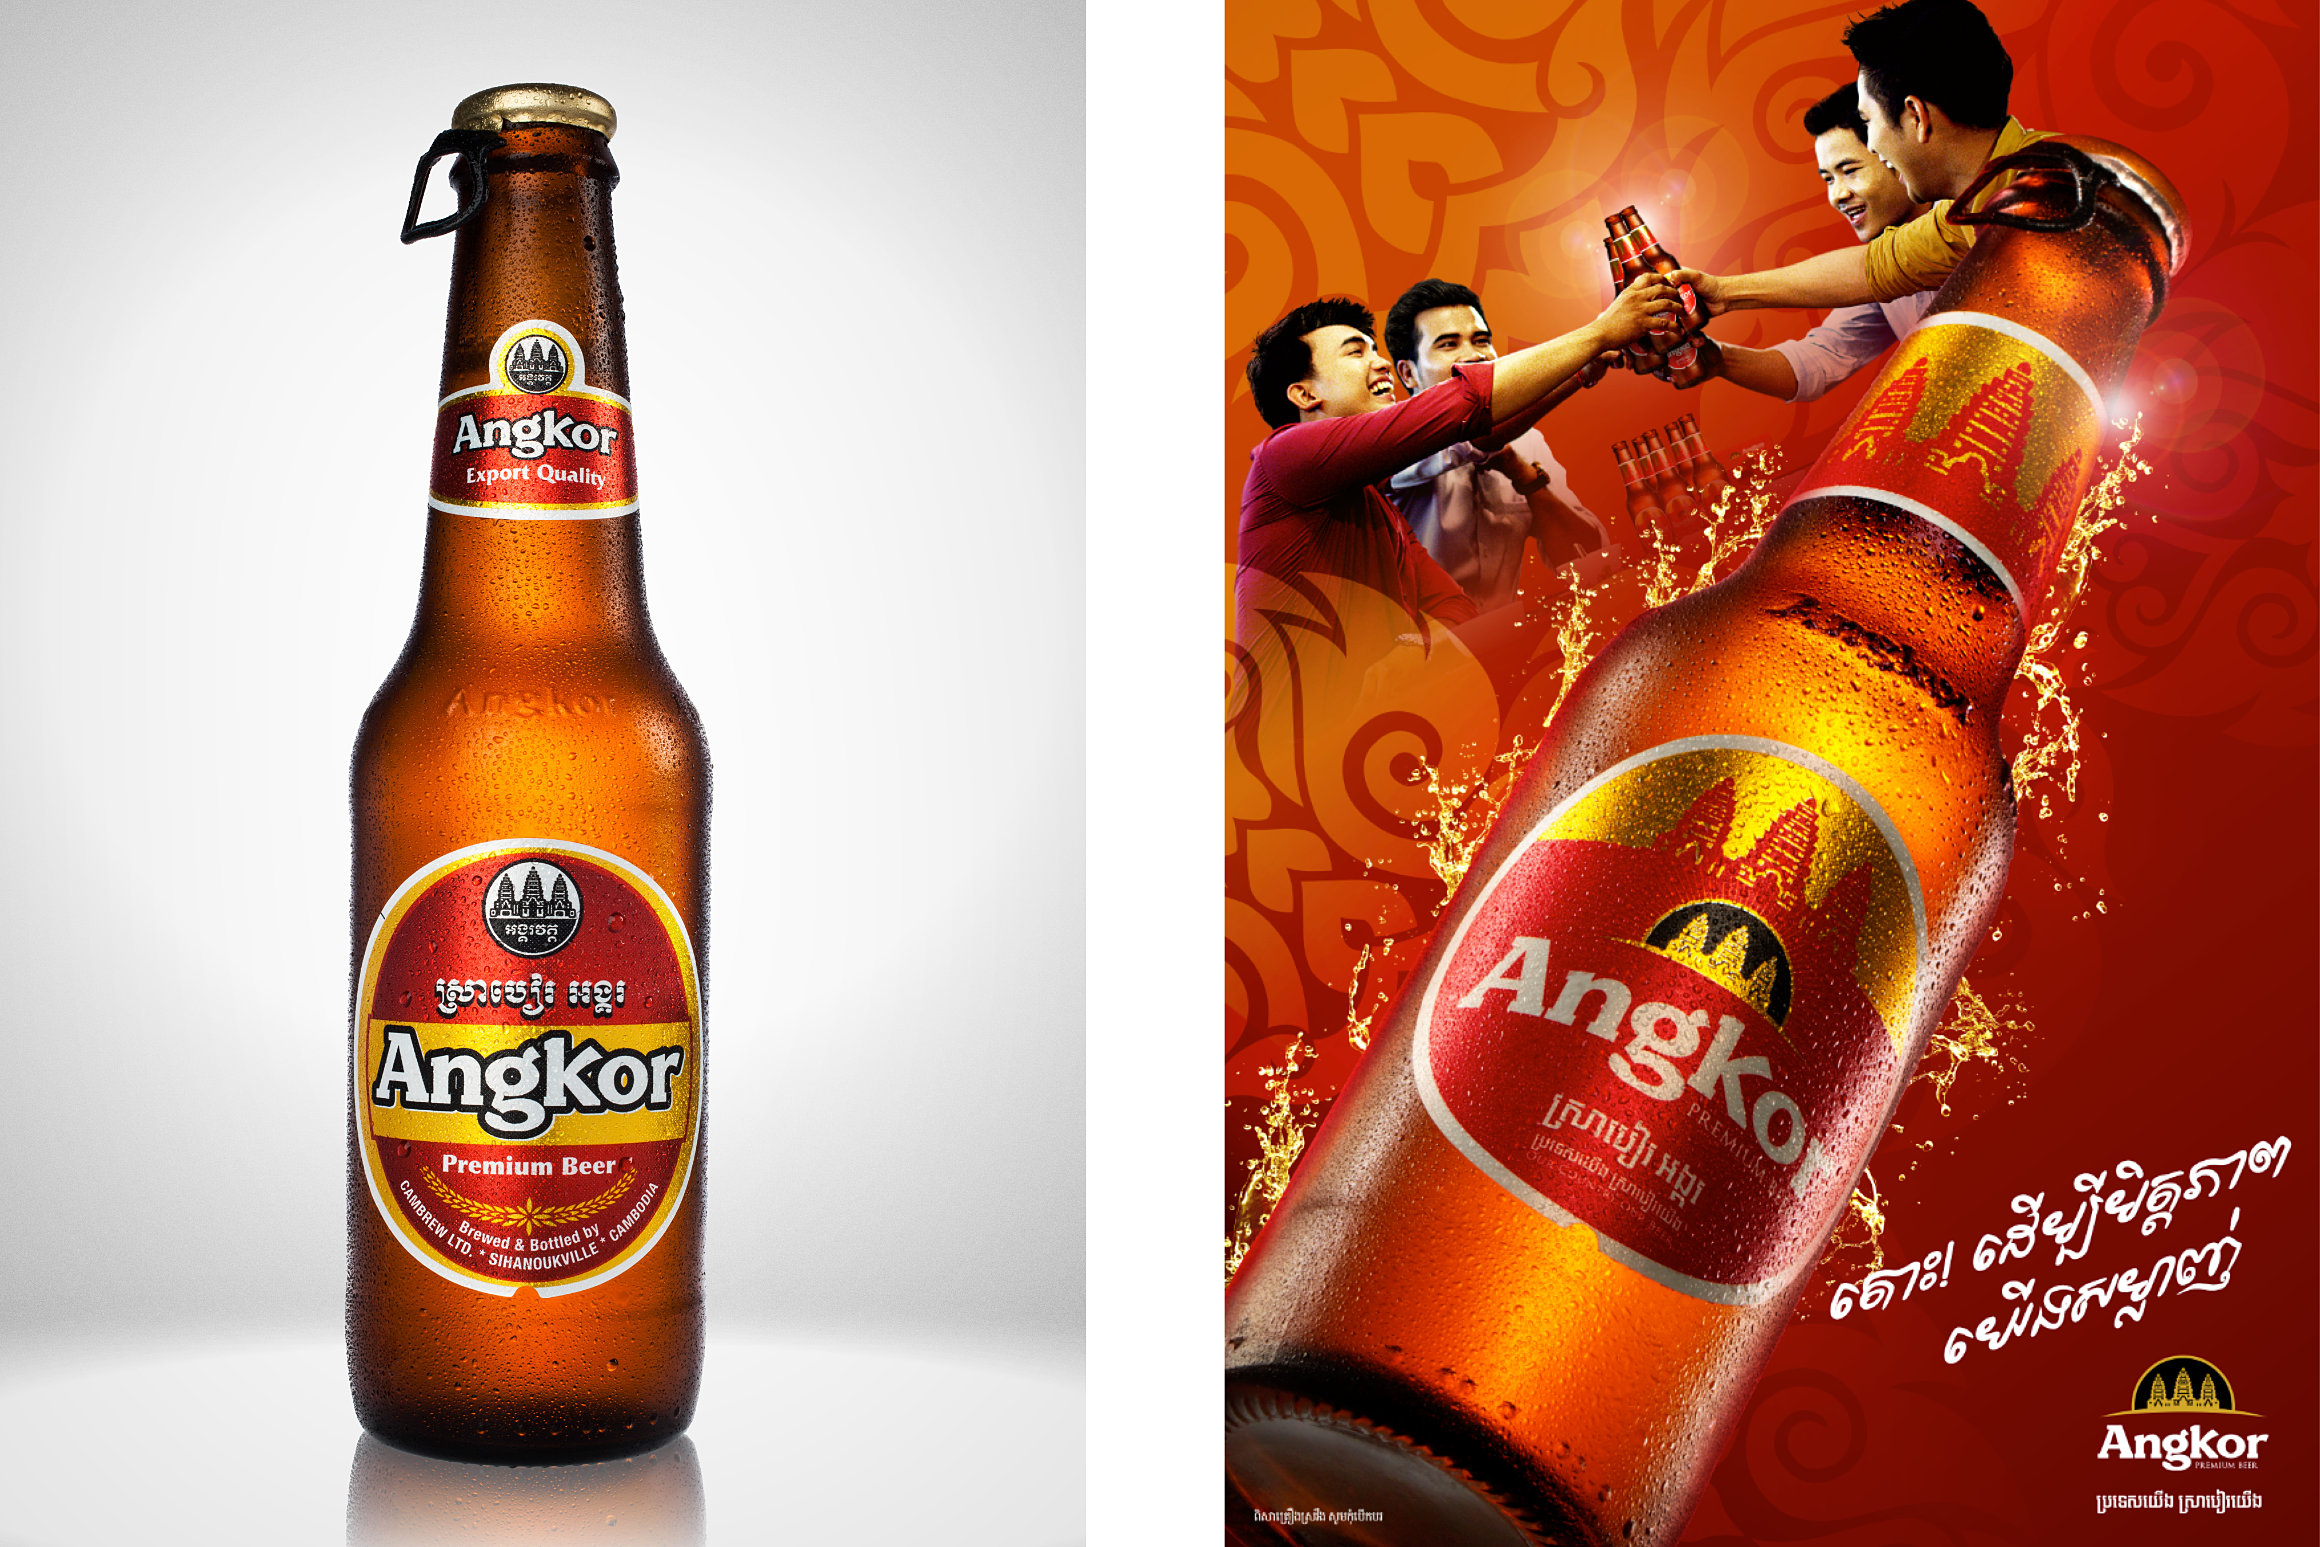 Angkor Beer bottle photographer - Advertising in Cambodia